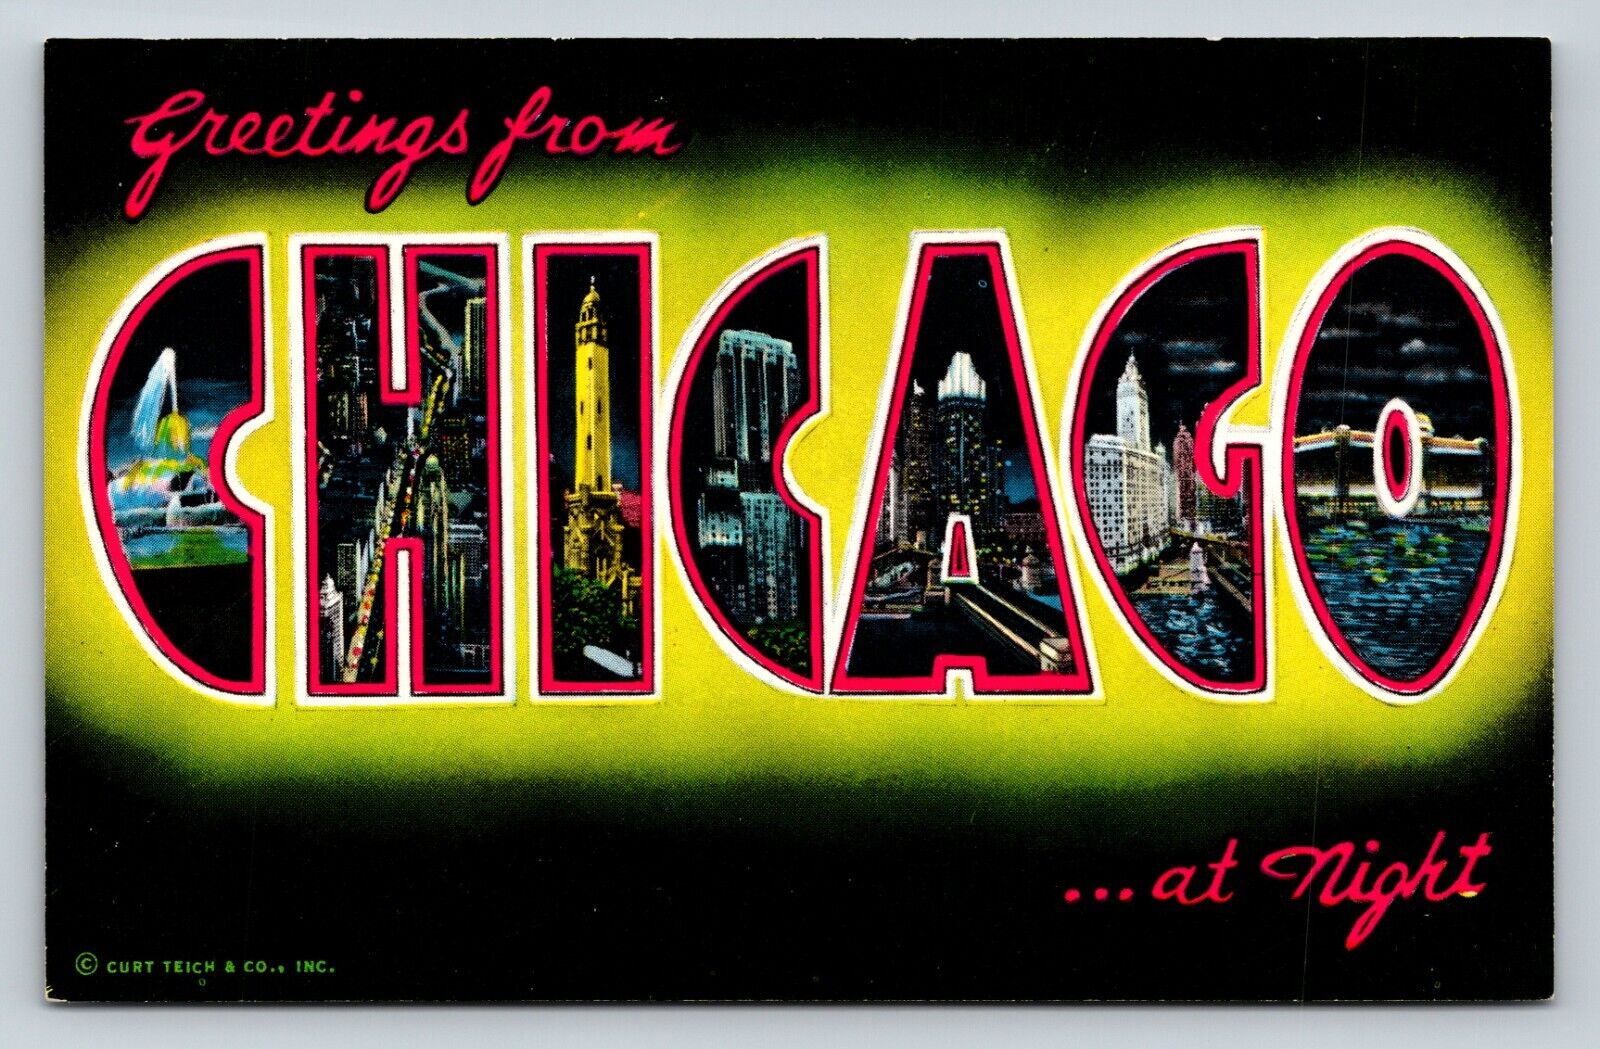 Greetings From Chicago Illinois At Night VINTAGE Postcard